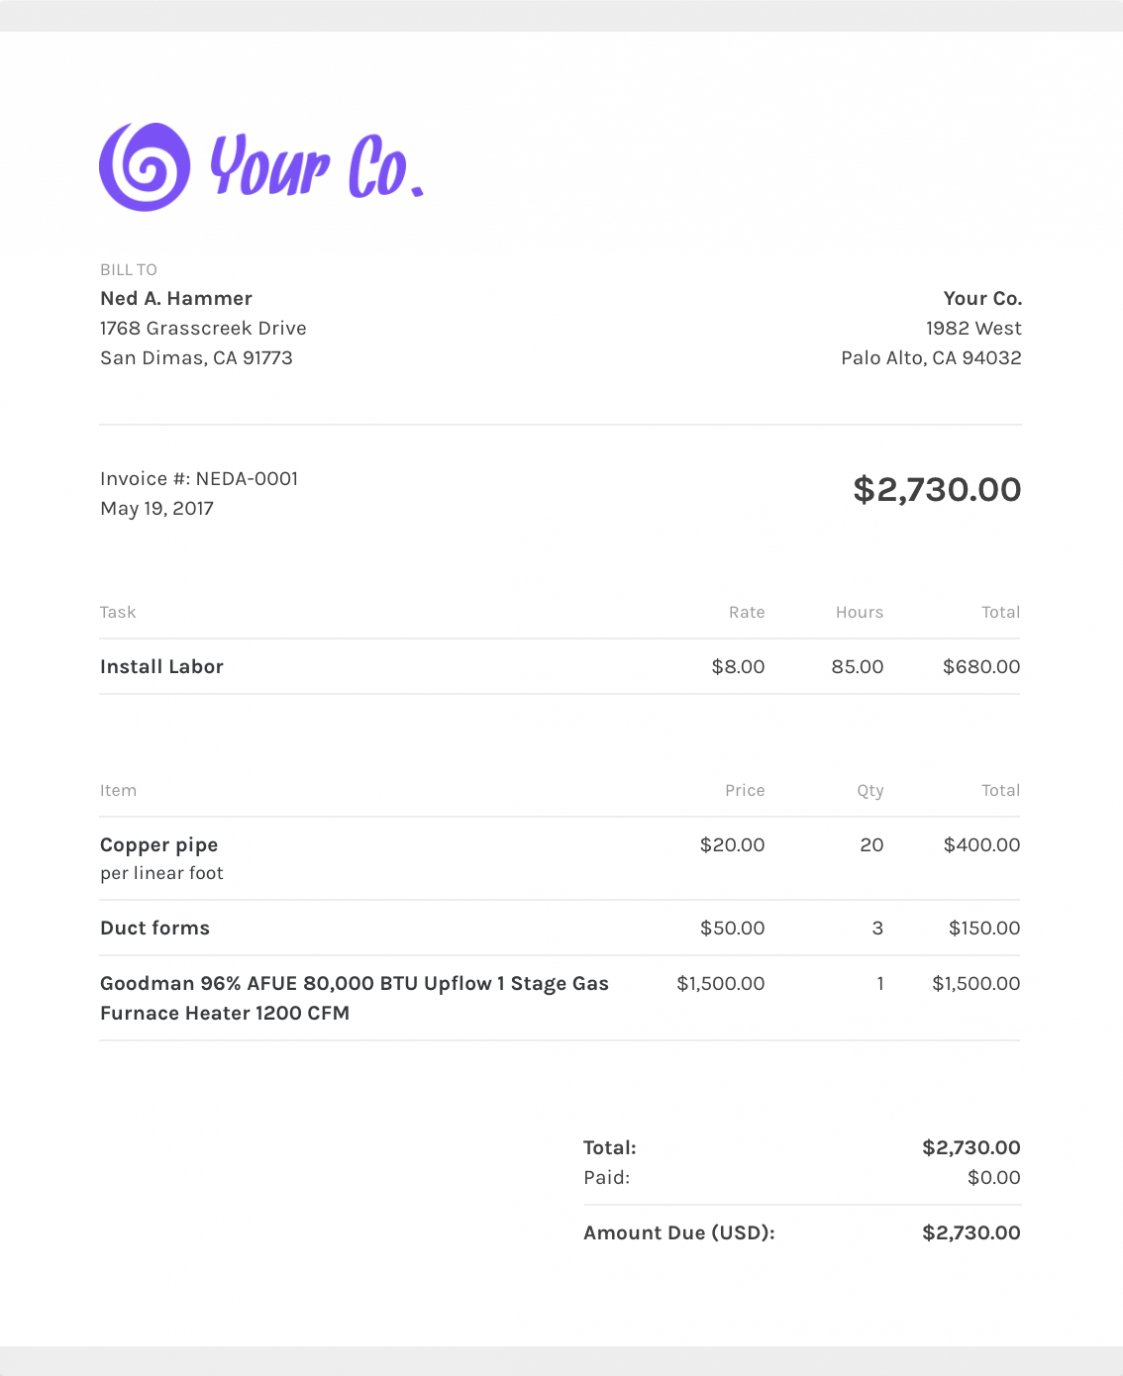 Free Trucking Company Invoice Template | Zipbooks within Trucking Company Invoice Template